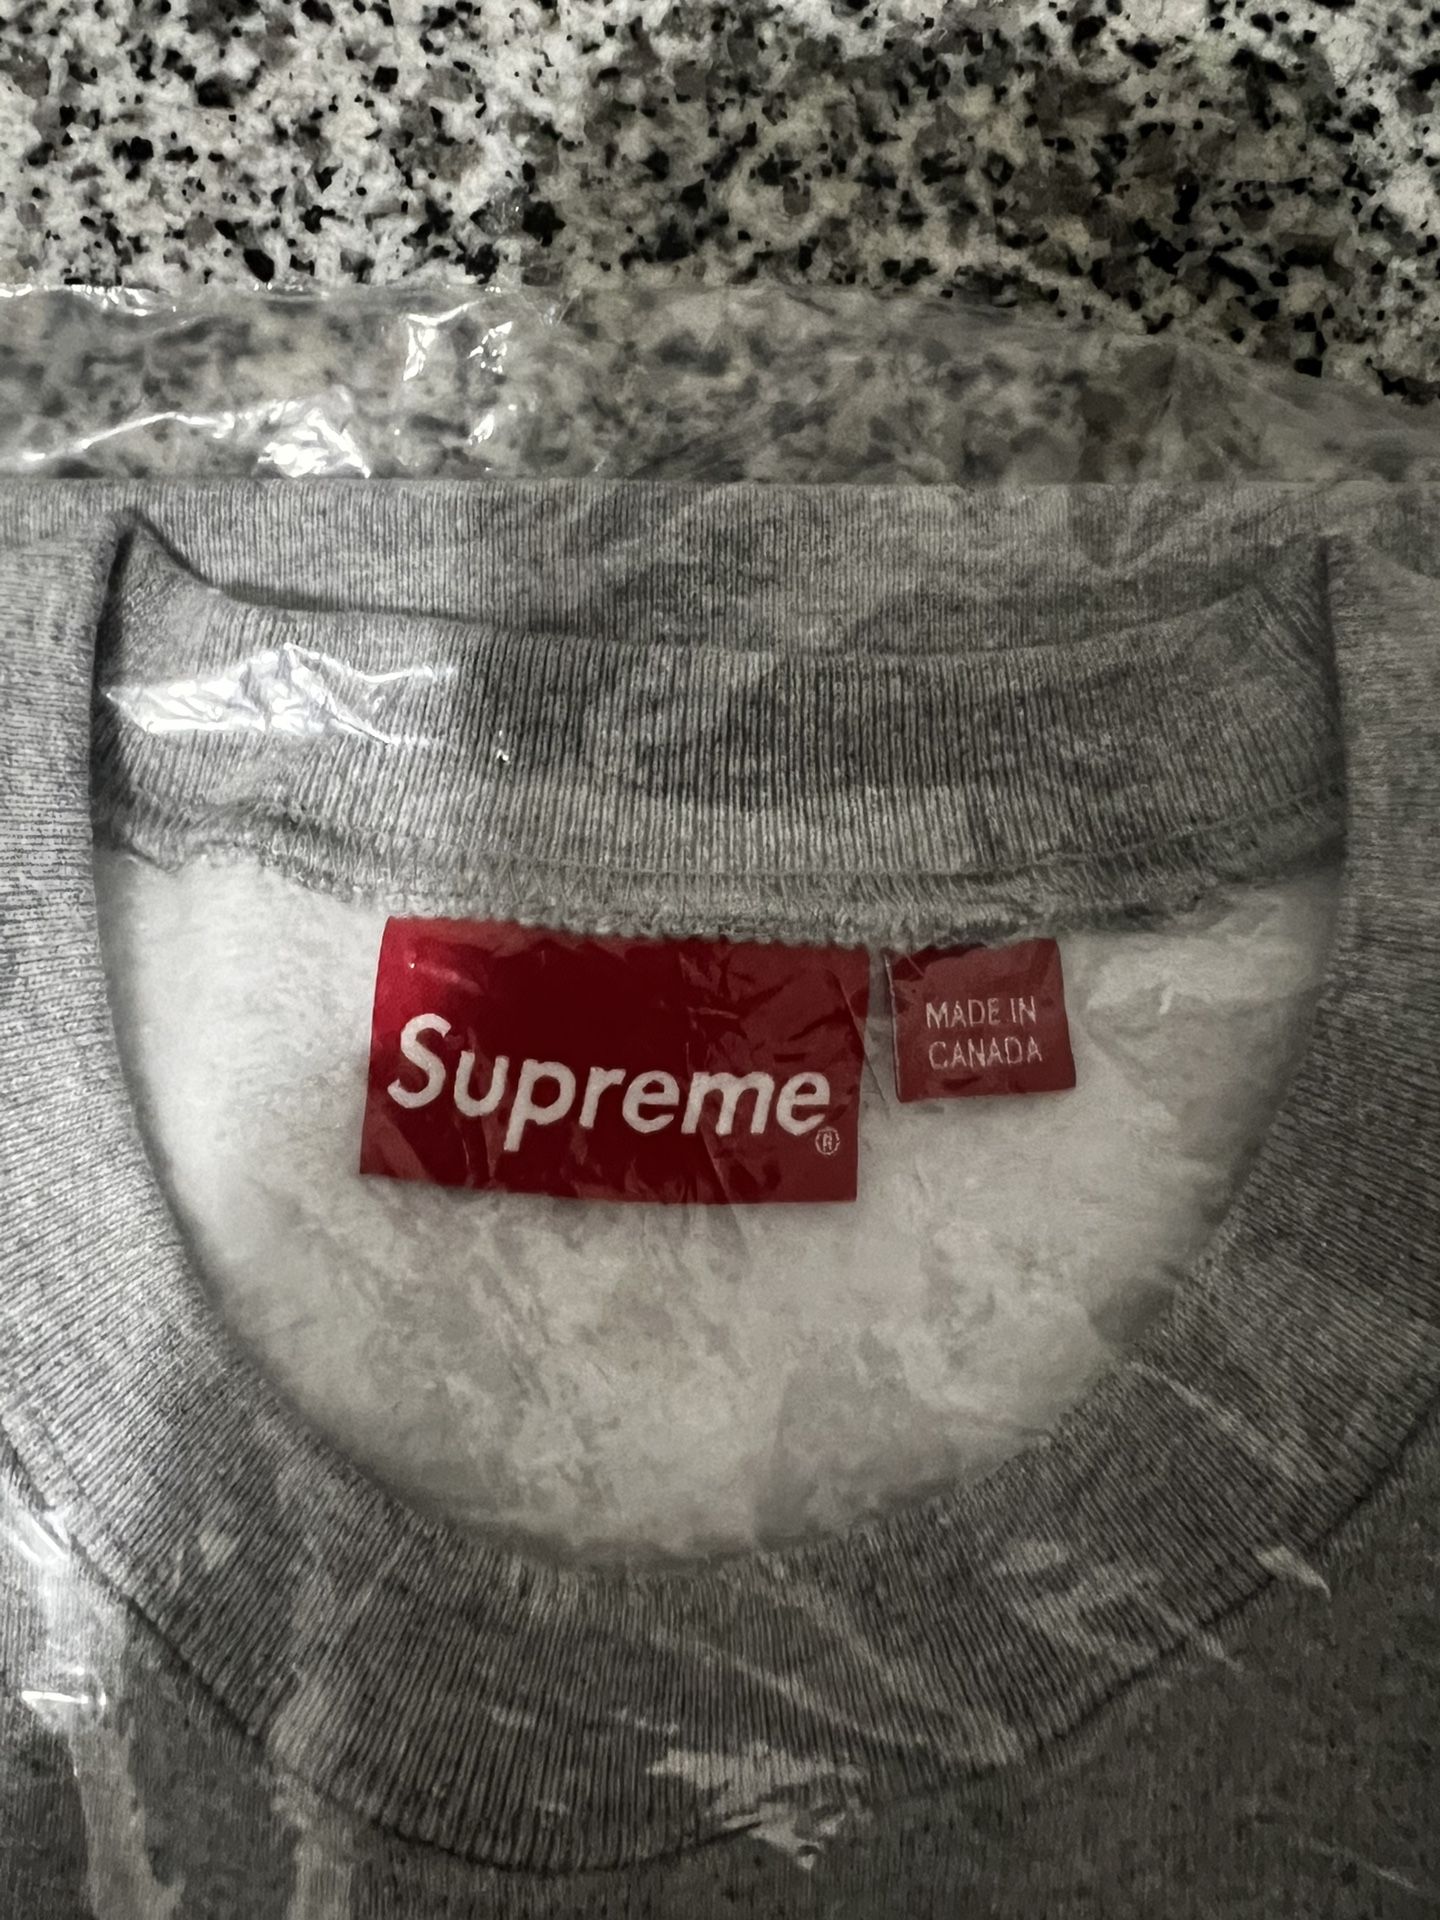 Supreme shibuya box logo tee for Sale in Queens, NY - OfferUp